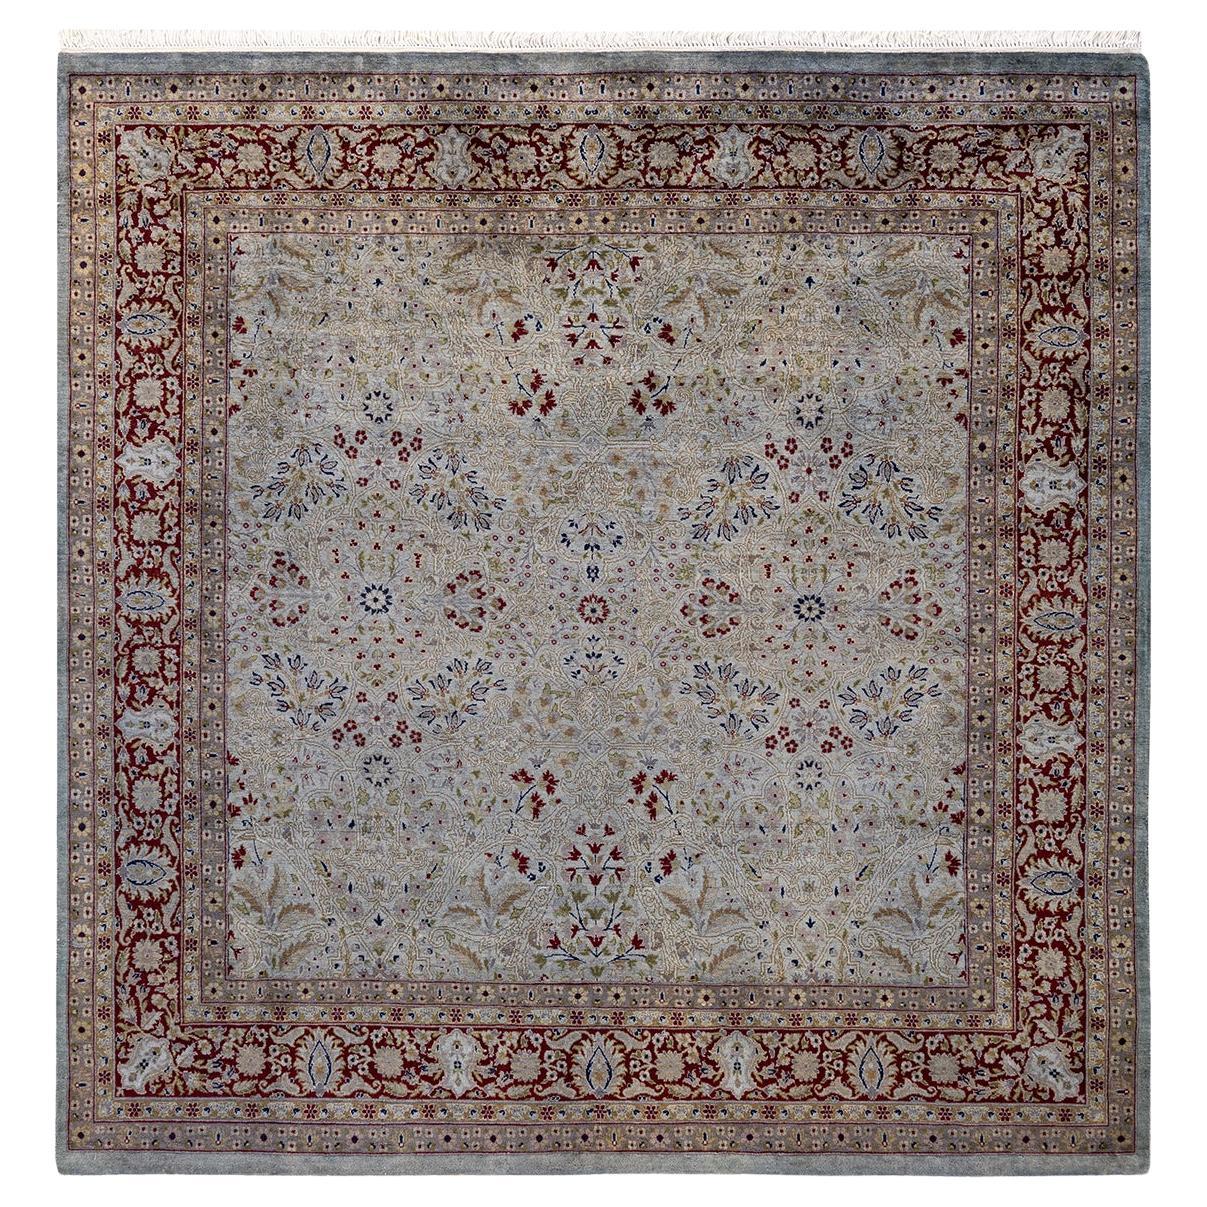 Contemporary Overdyed Hand Knotted Wool Gray Square Area Rug